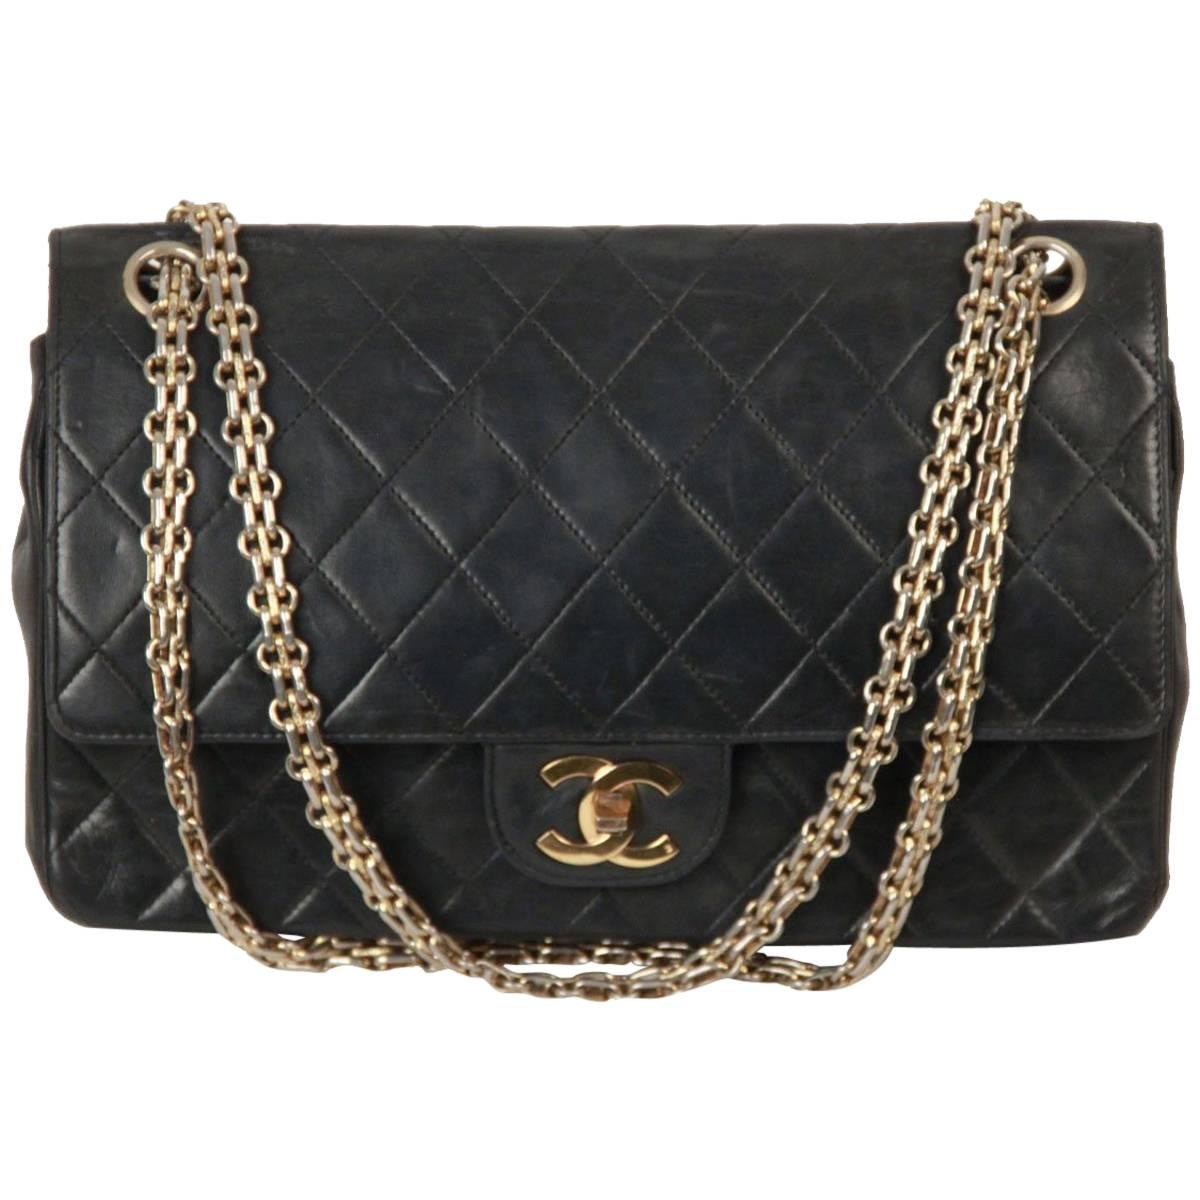 Vintage Chanel 2.55 Double Flap Black Denim Quilted Leather Shoulder Bag  25cm Medium Rare - Mrs Vintage - Selling Vintage Wedding Lace Dress / Gowns  & Accessories from 1920s – 1990s. And